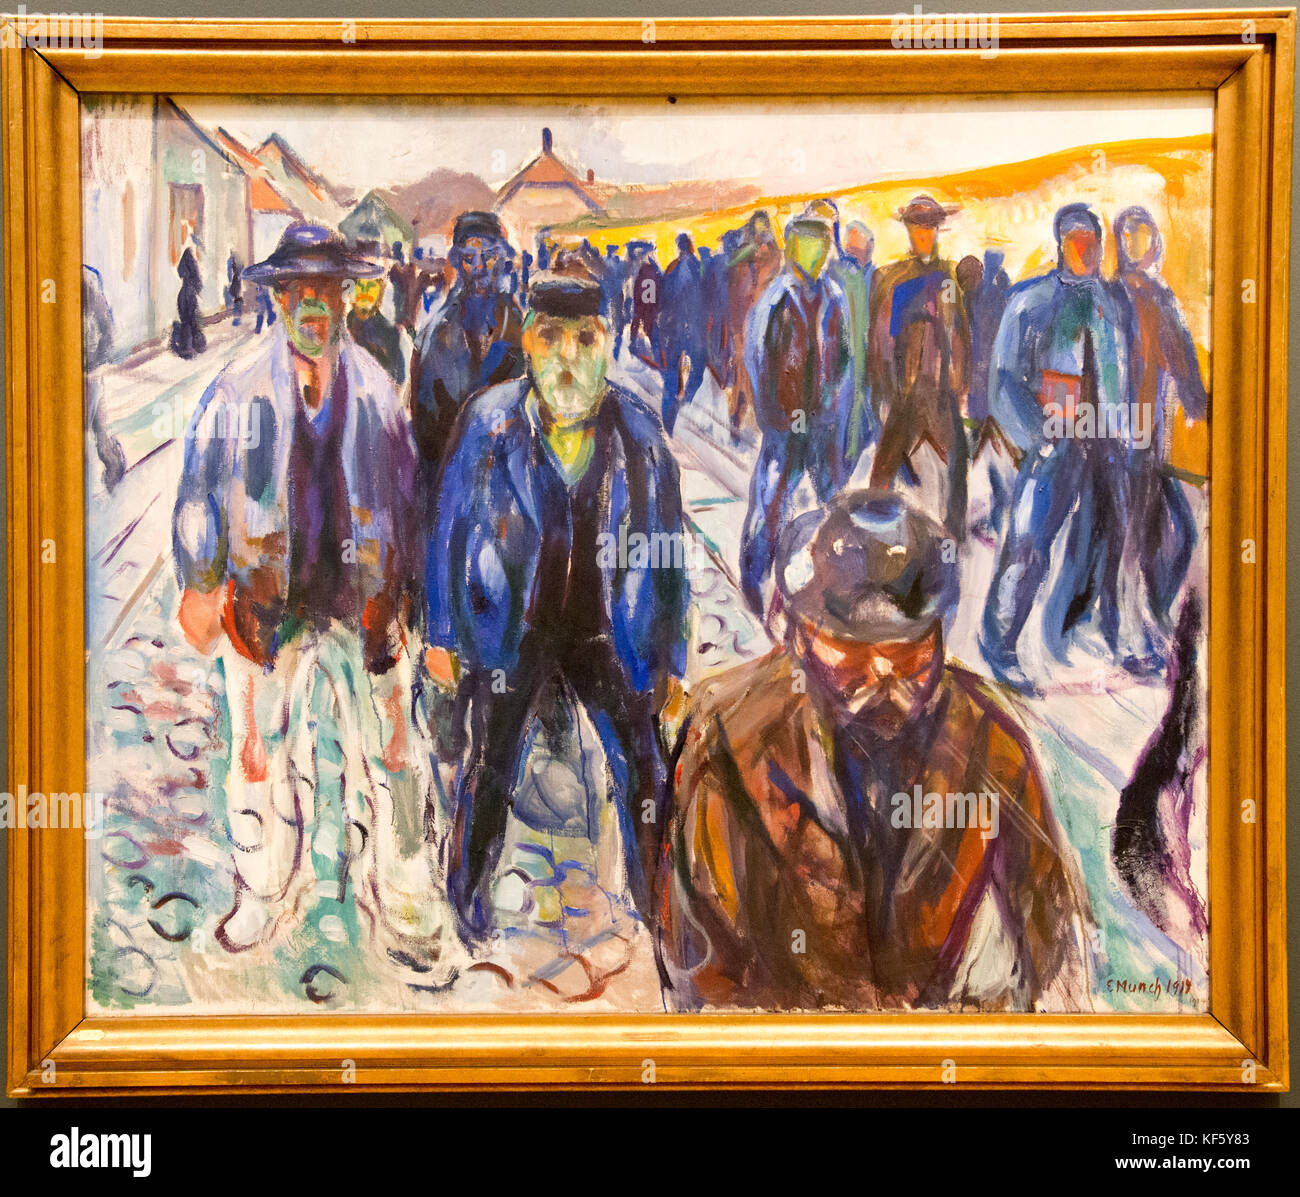 'workers on their way home' from Edvard Munch Stock Photo